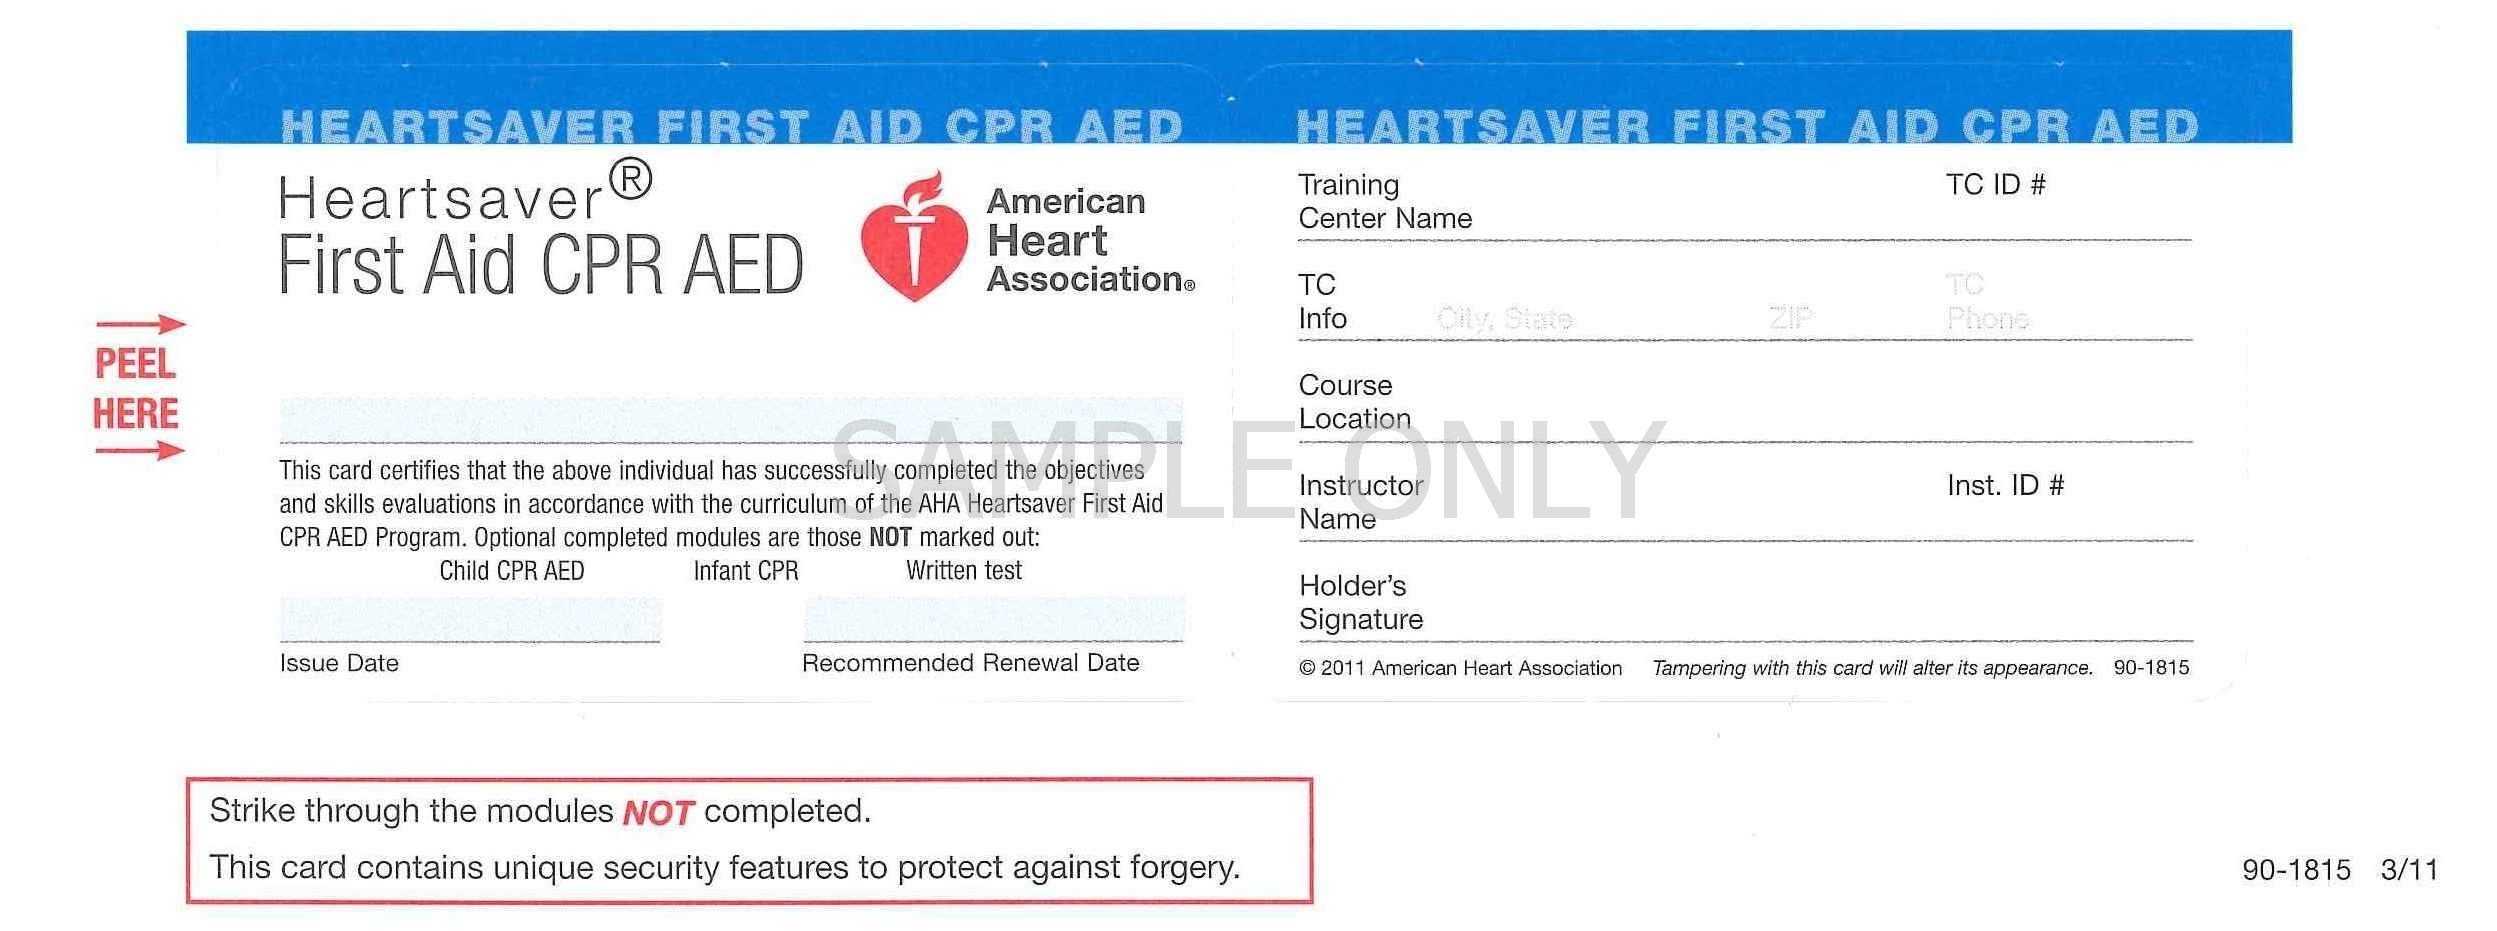 Cf6 Cpr Card Template | Wiring Library Regarding Cpr Card Template